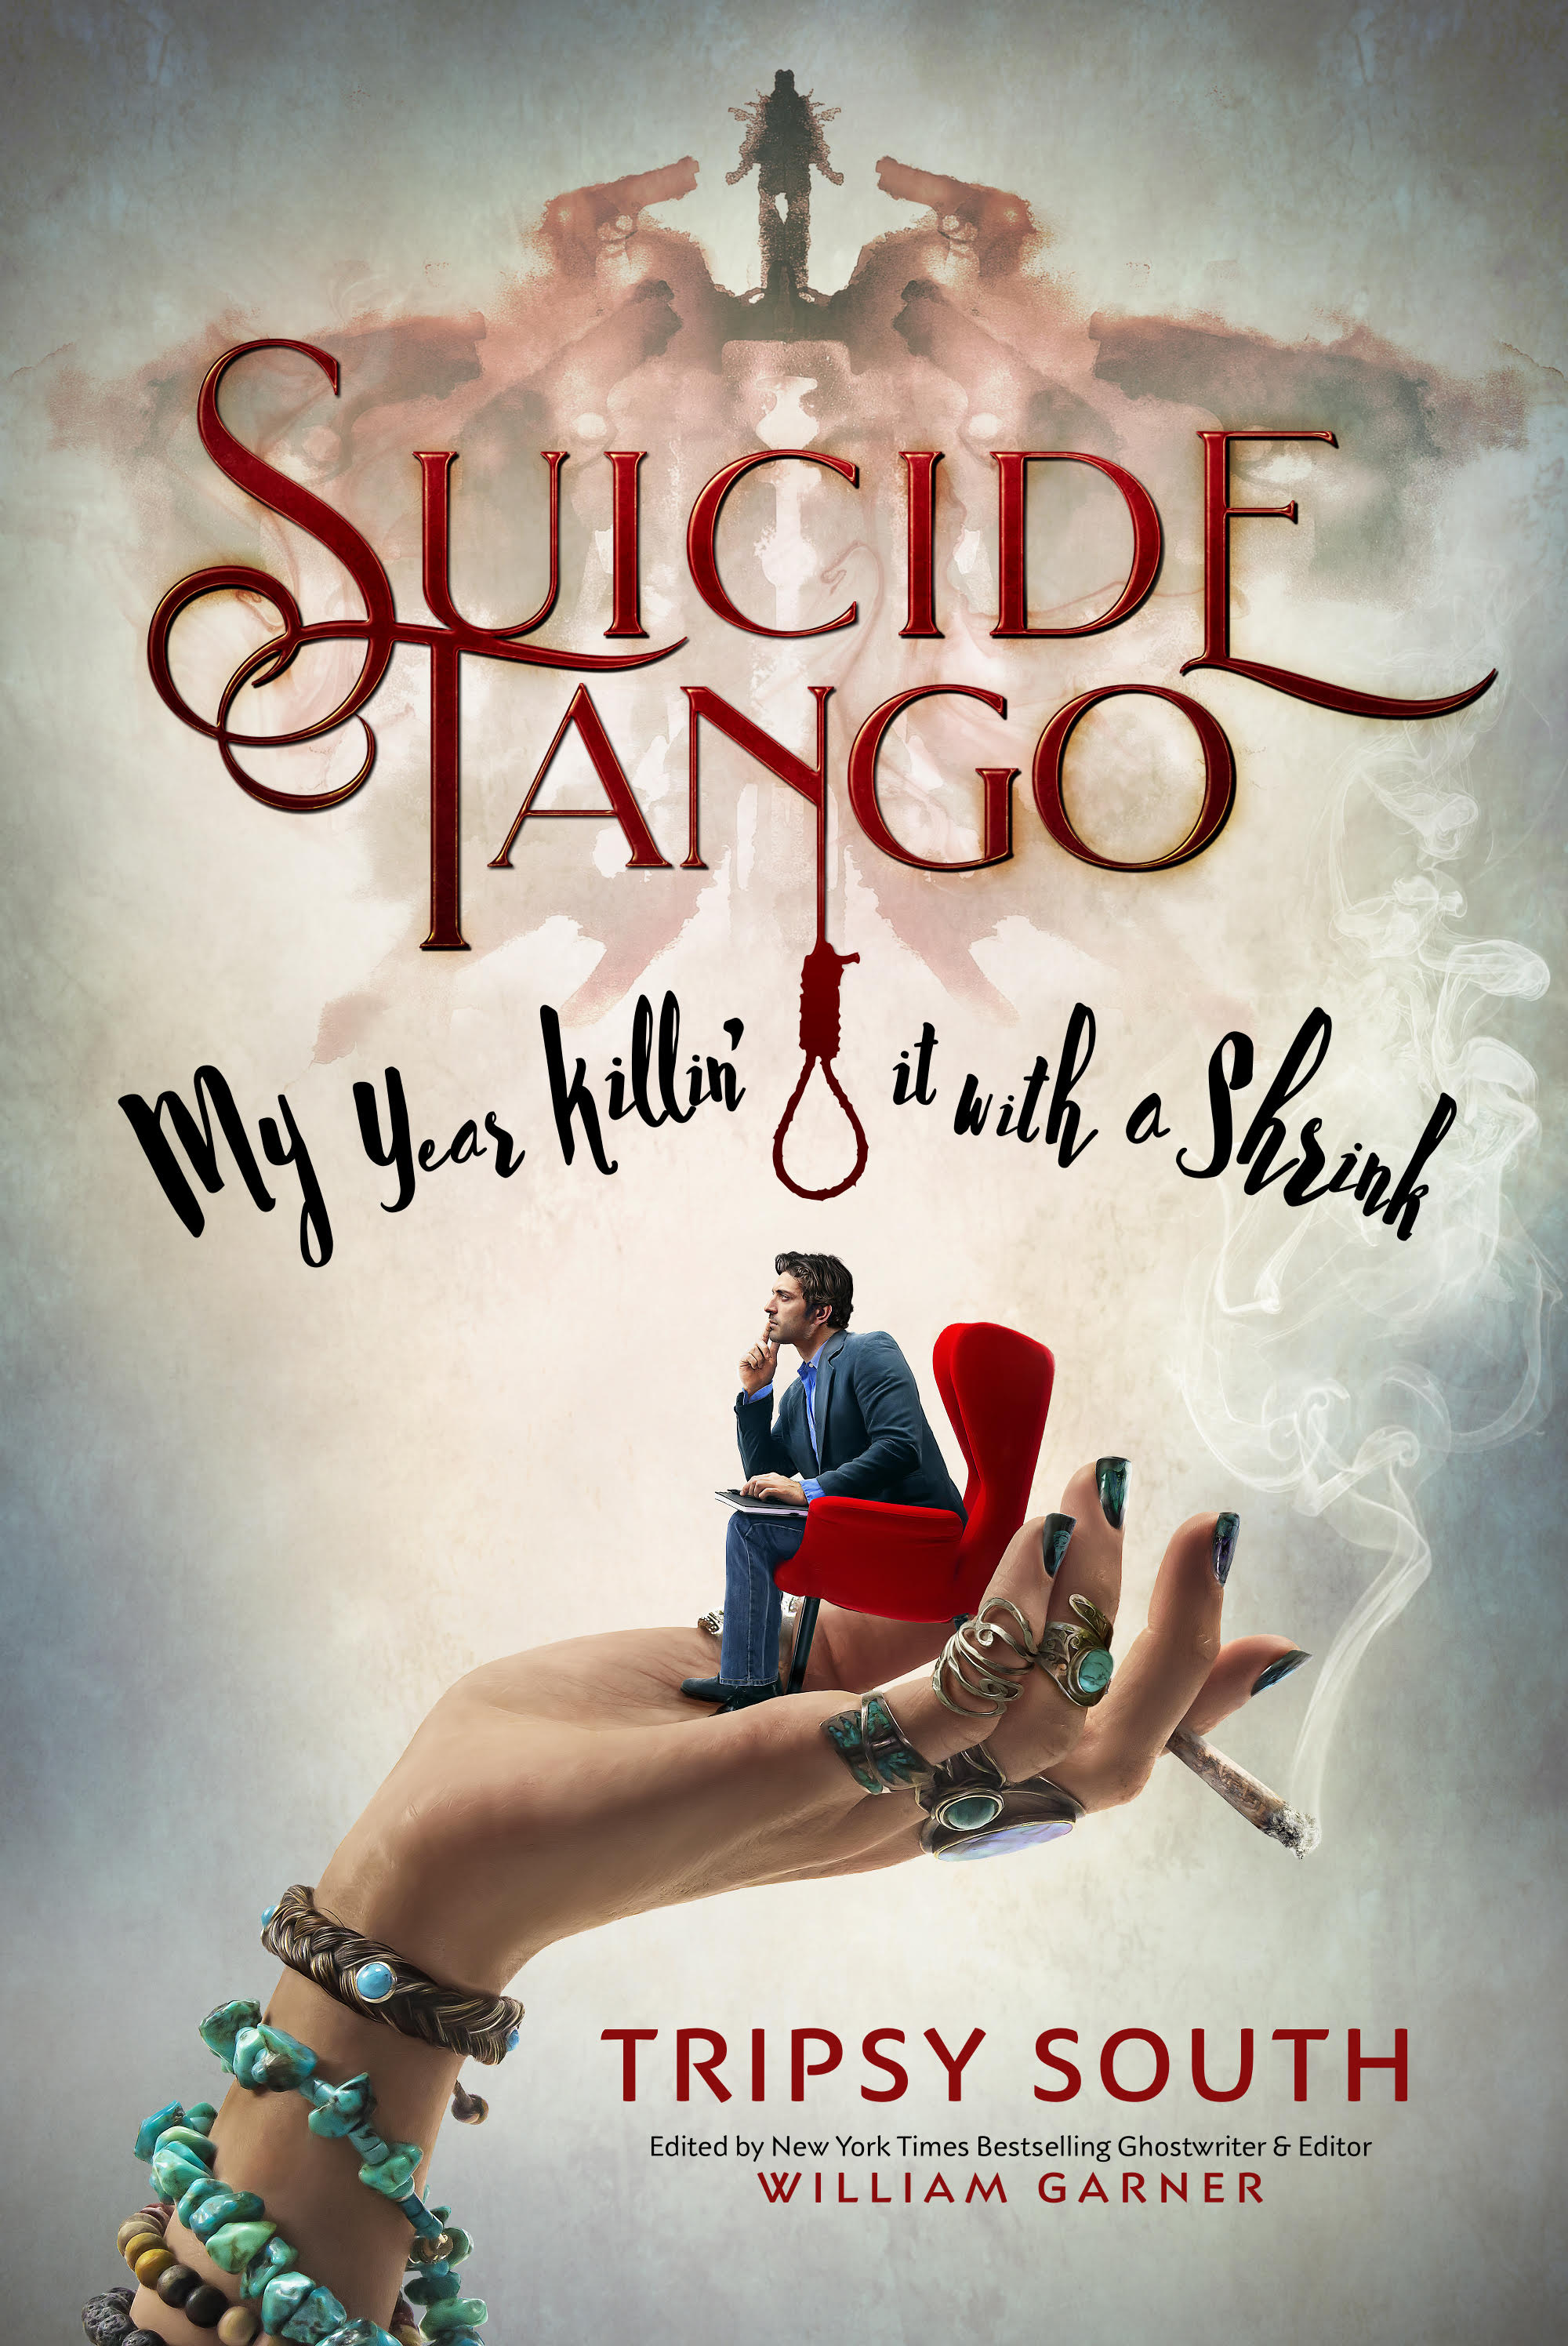 SUICIDE TANGO: My Year Killin’ It With A Shrink